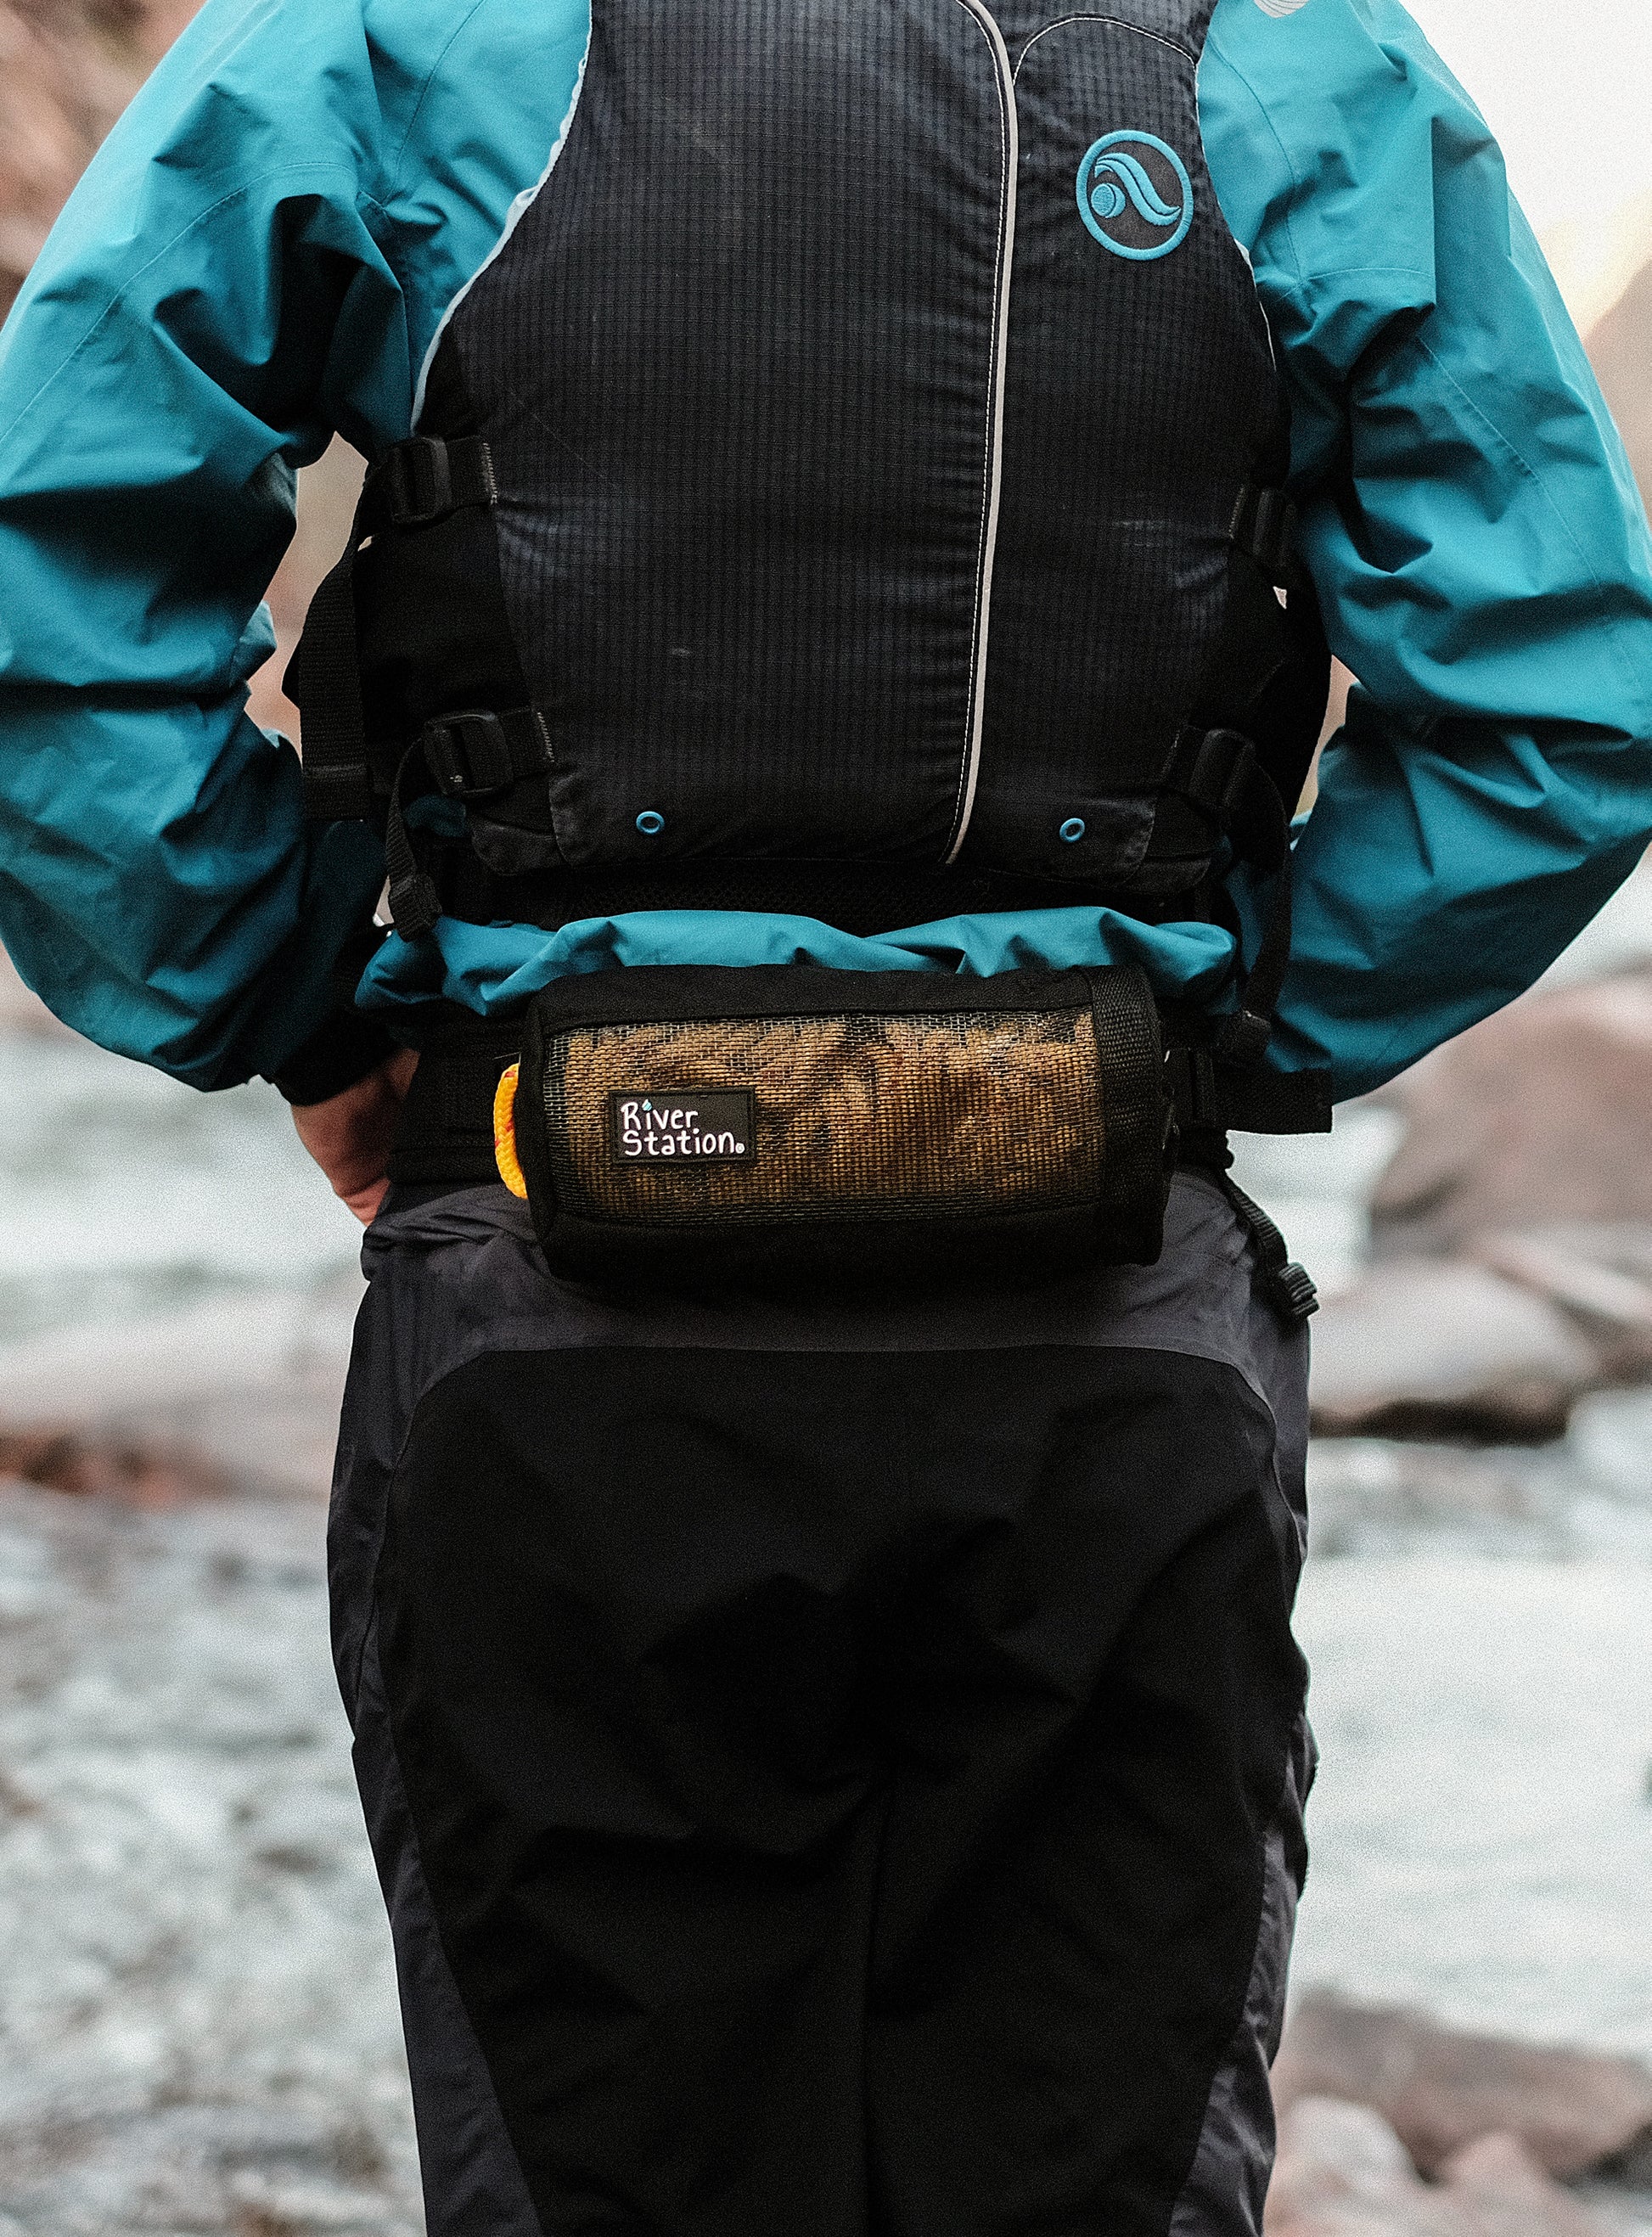 Best Waist throw bag for whitewater rafting.